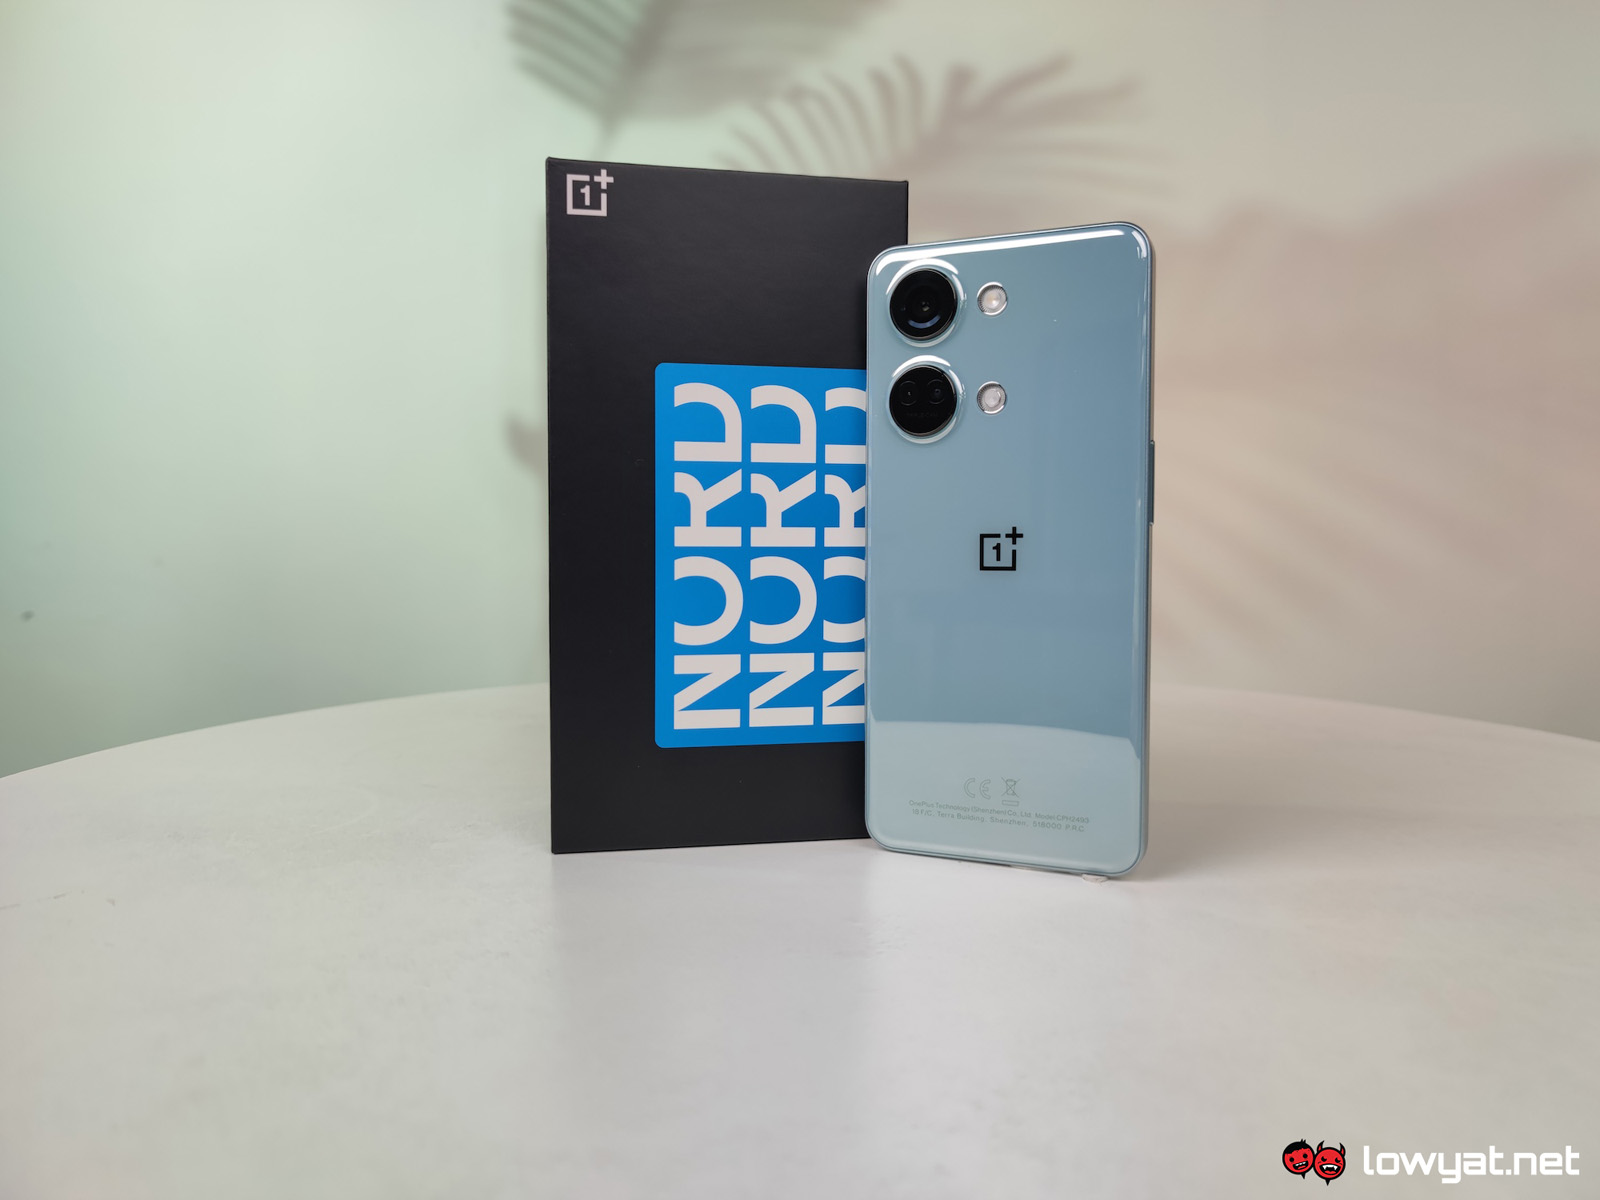 OnePlus NORD 3: A Good Upgrade? 